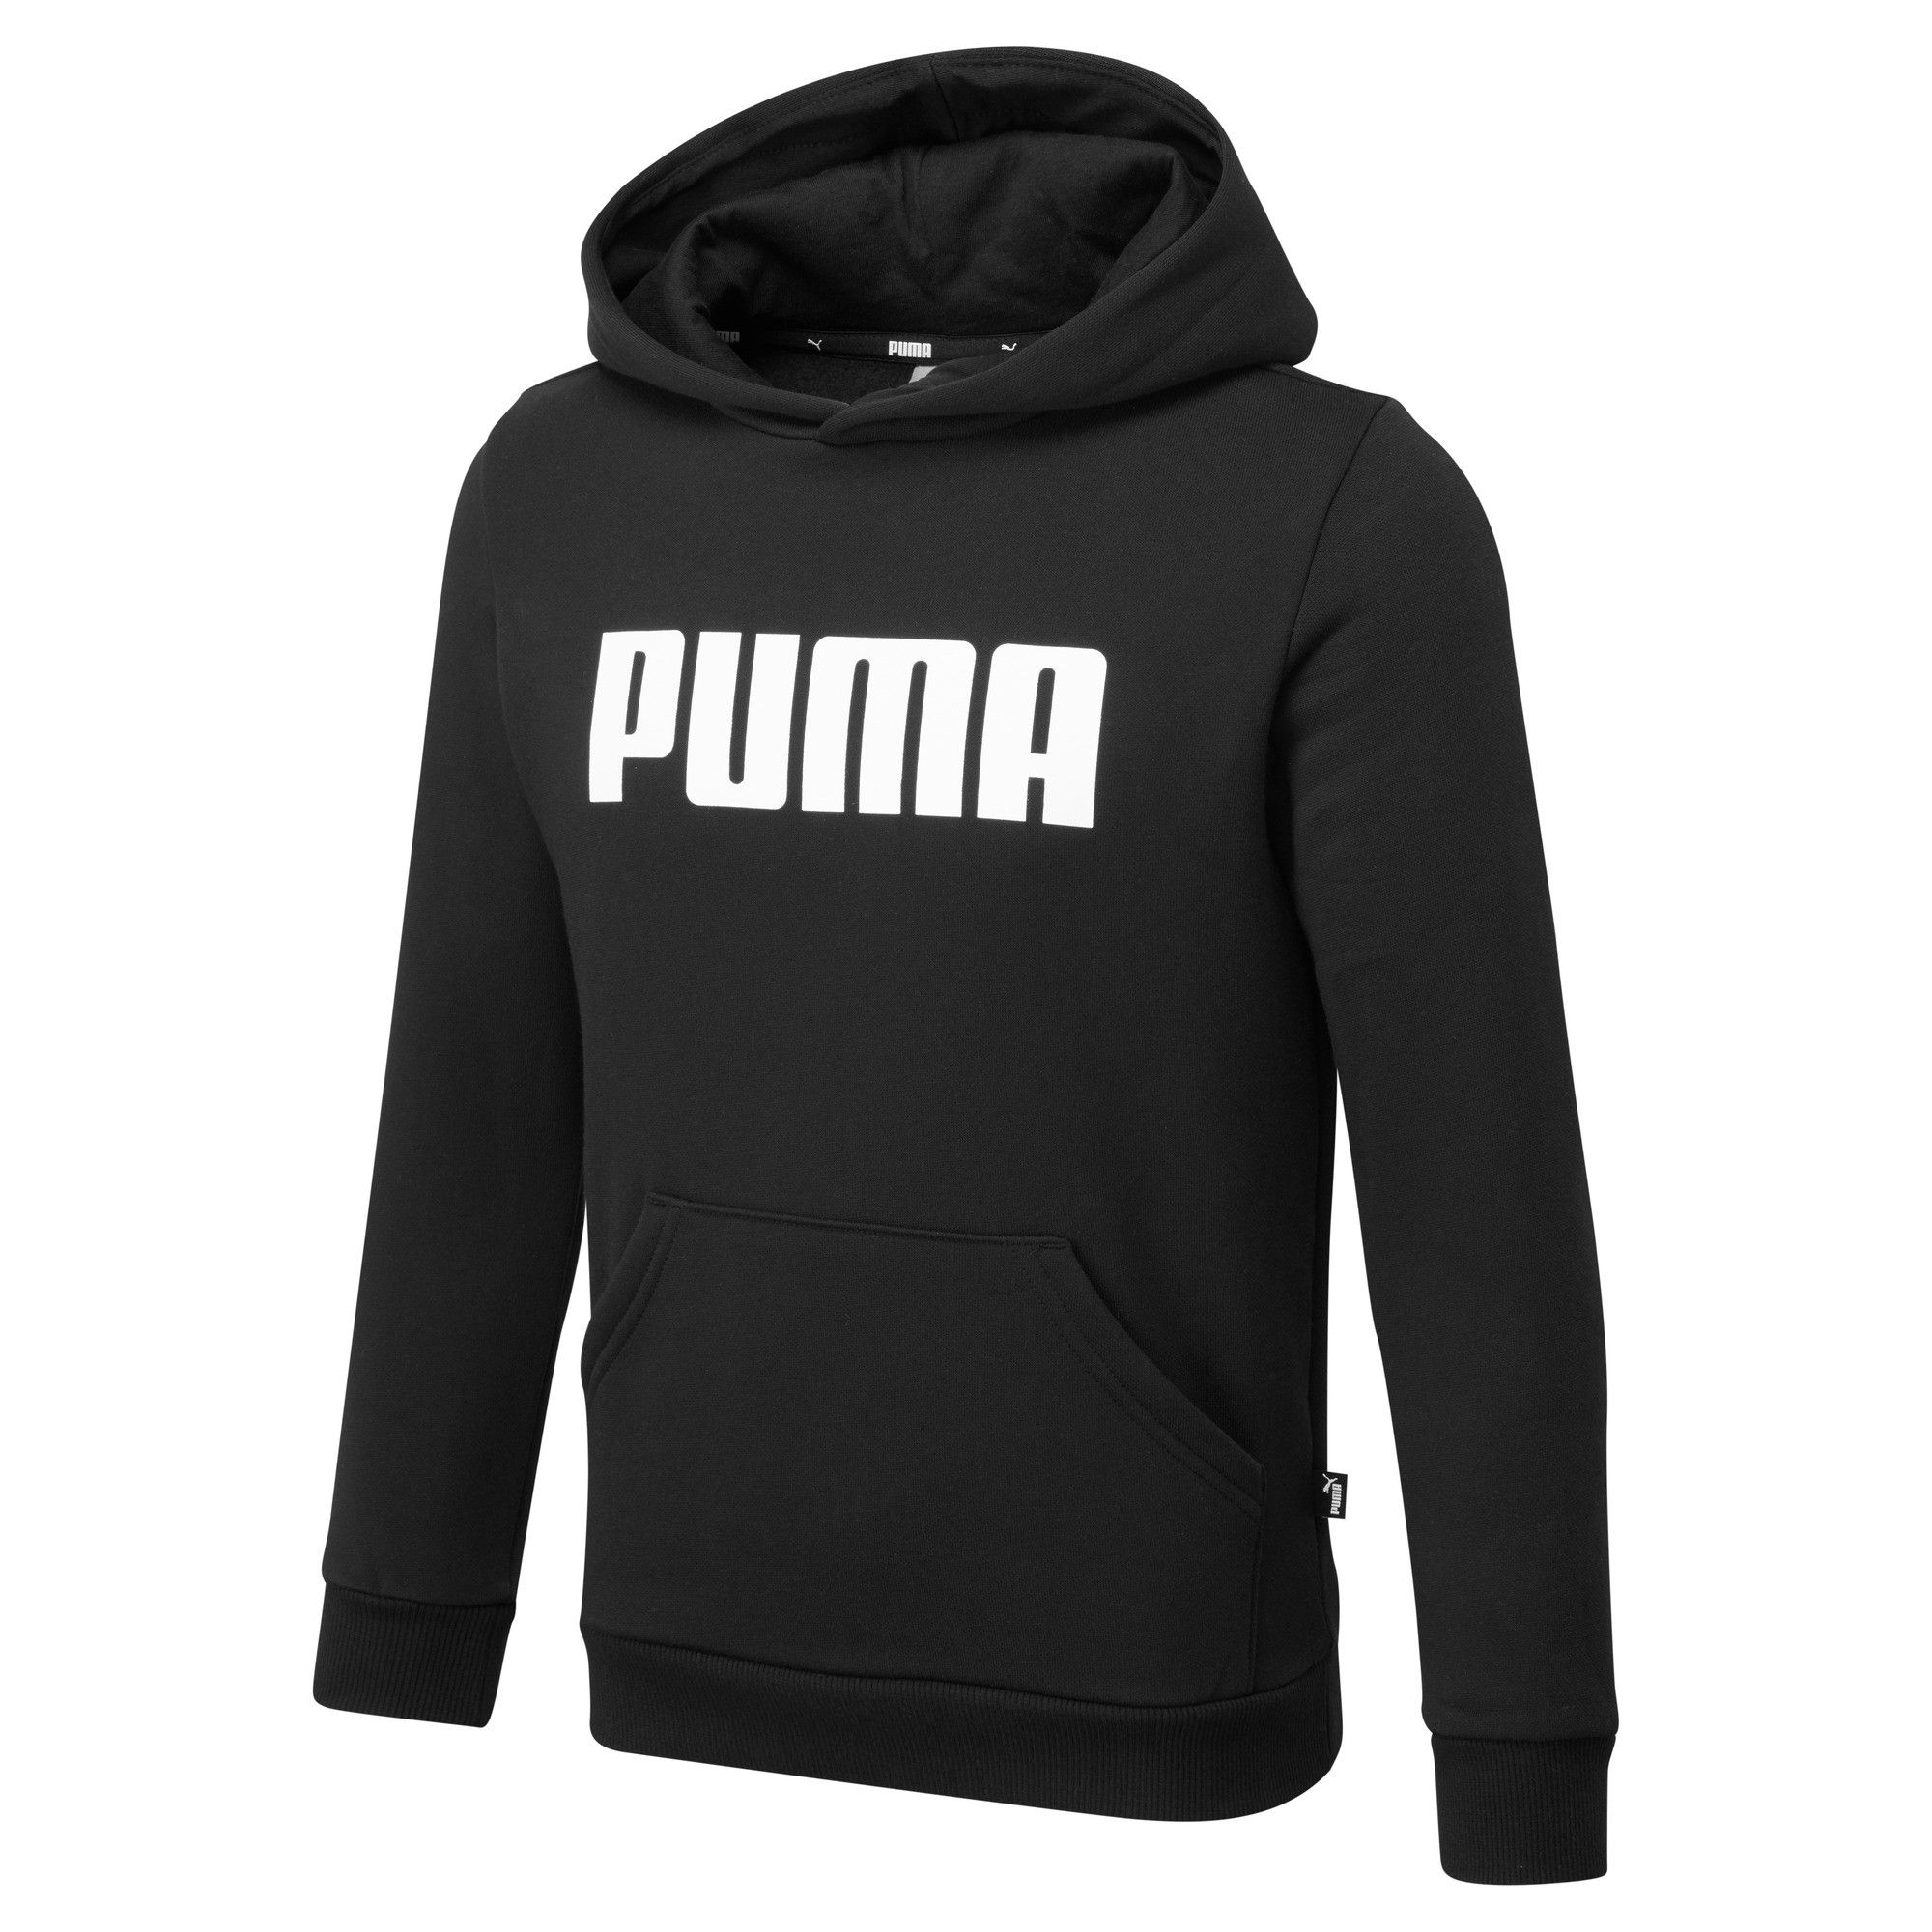  An undisputed essential for any young streetwear fan, this long-sleeve hoodie is a true classic. Made from cosy cotton and low-impact recycled materials. FEATURES & BENEFITS Contains Recycled Material: Made with recycled fibers. One of PUMA's answers to reduce our environmental impact. DETAILS Hooded necklineLong sleeves